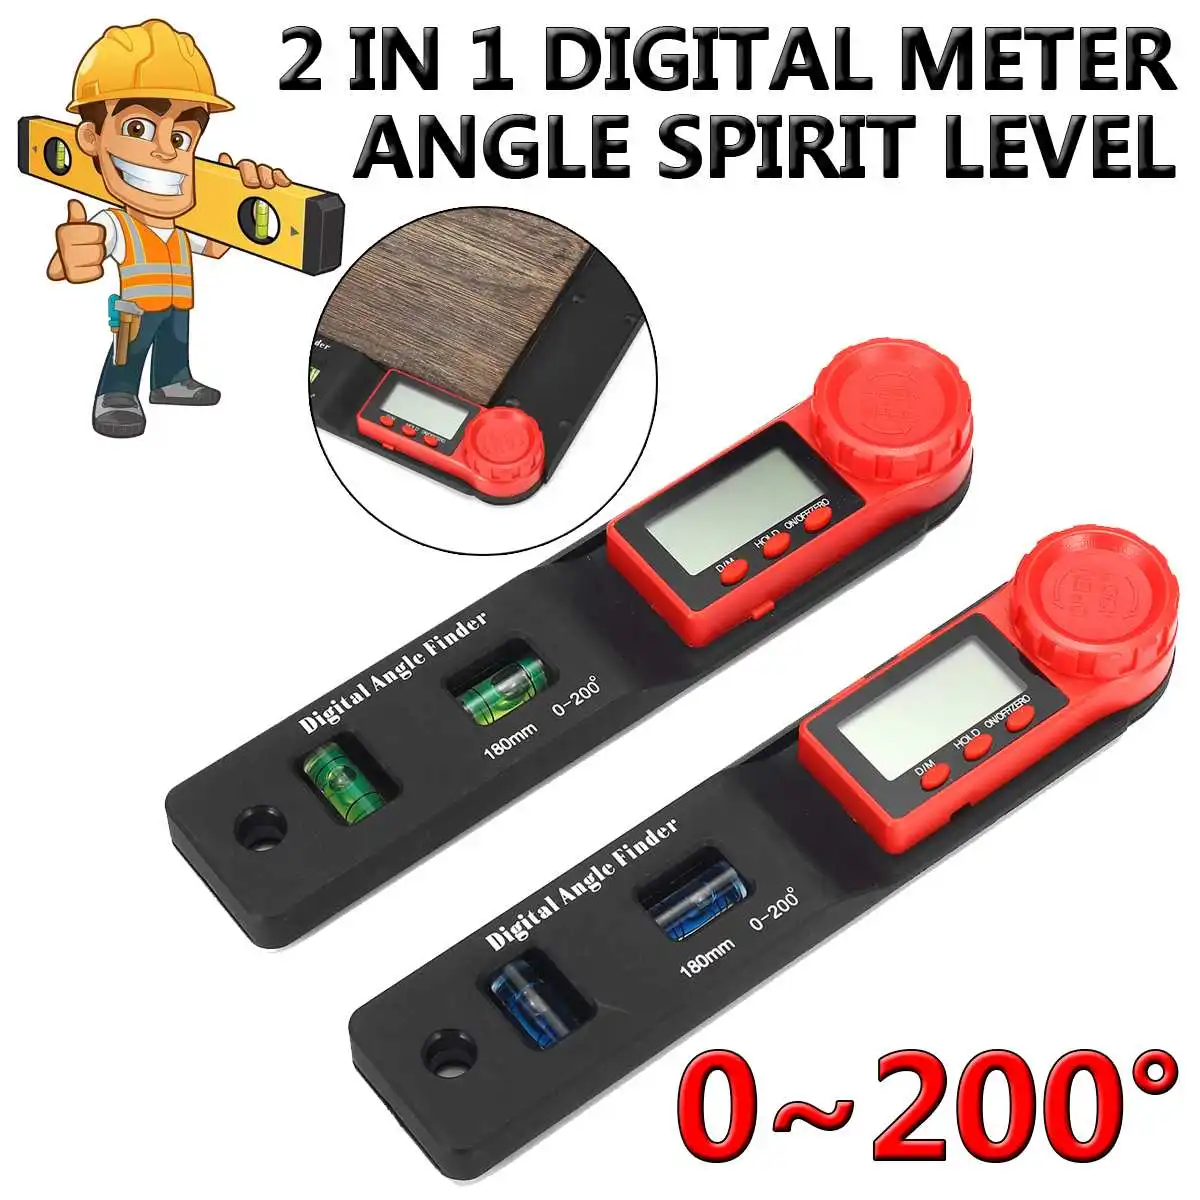 

2 in 1 Digital Meter Angle Inclinometer Spirit level Angle Ruler Electron Goniometer Protractor Angle finder Measuring Tool